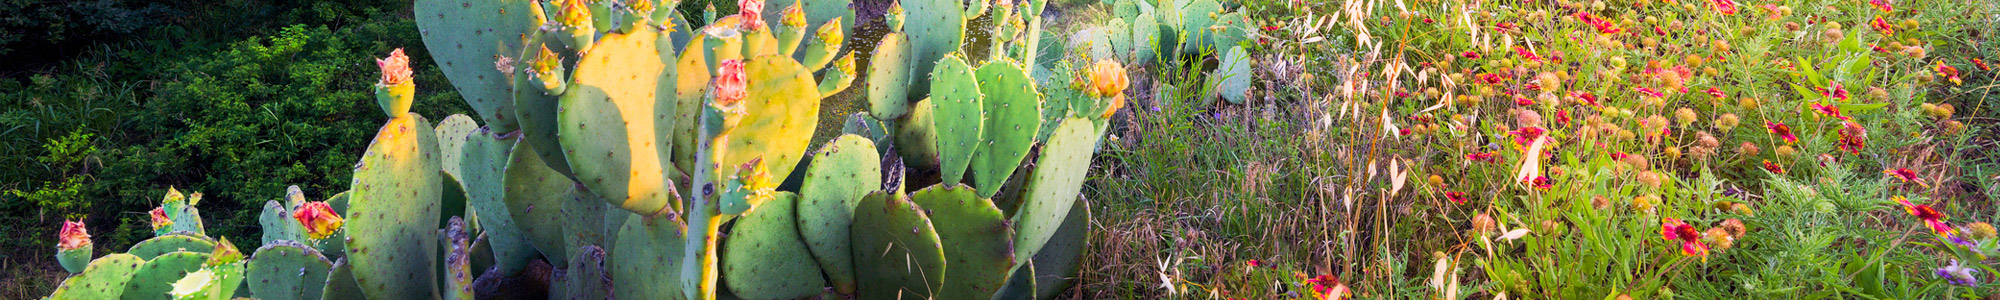 wildflowers and cactus at sunset